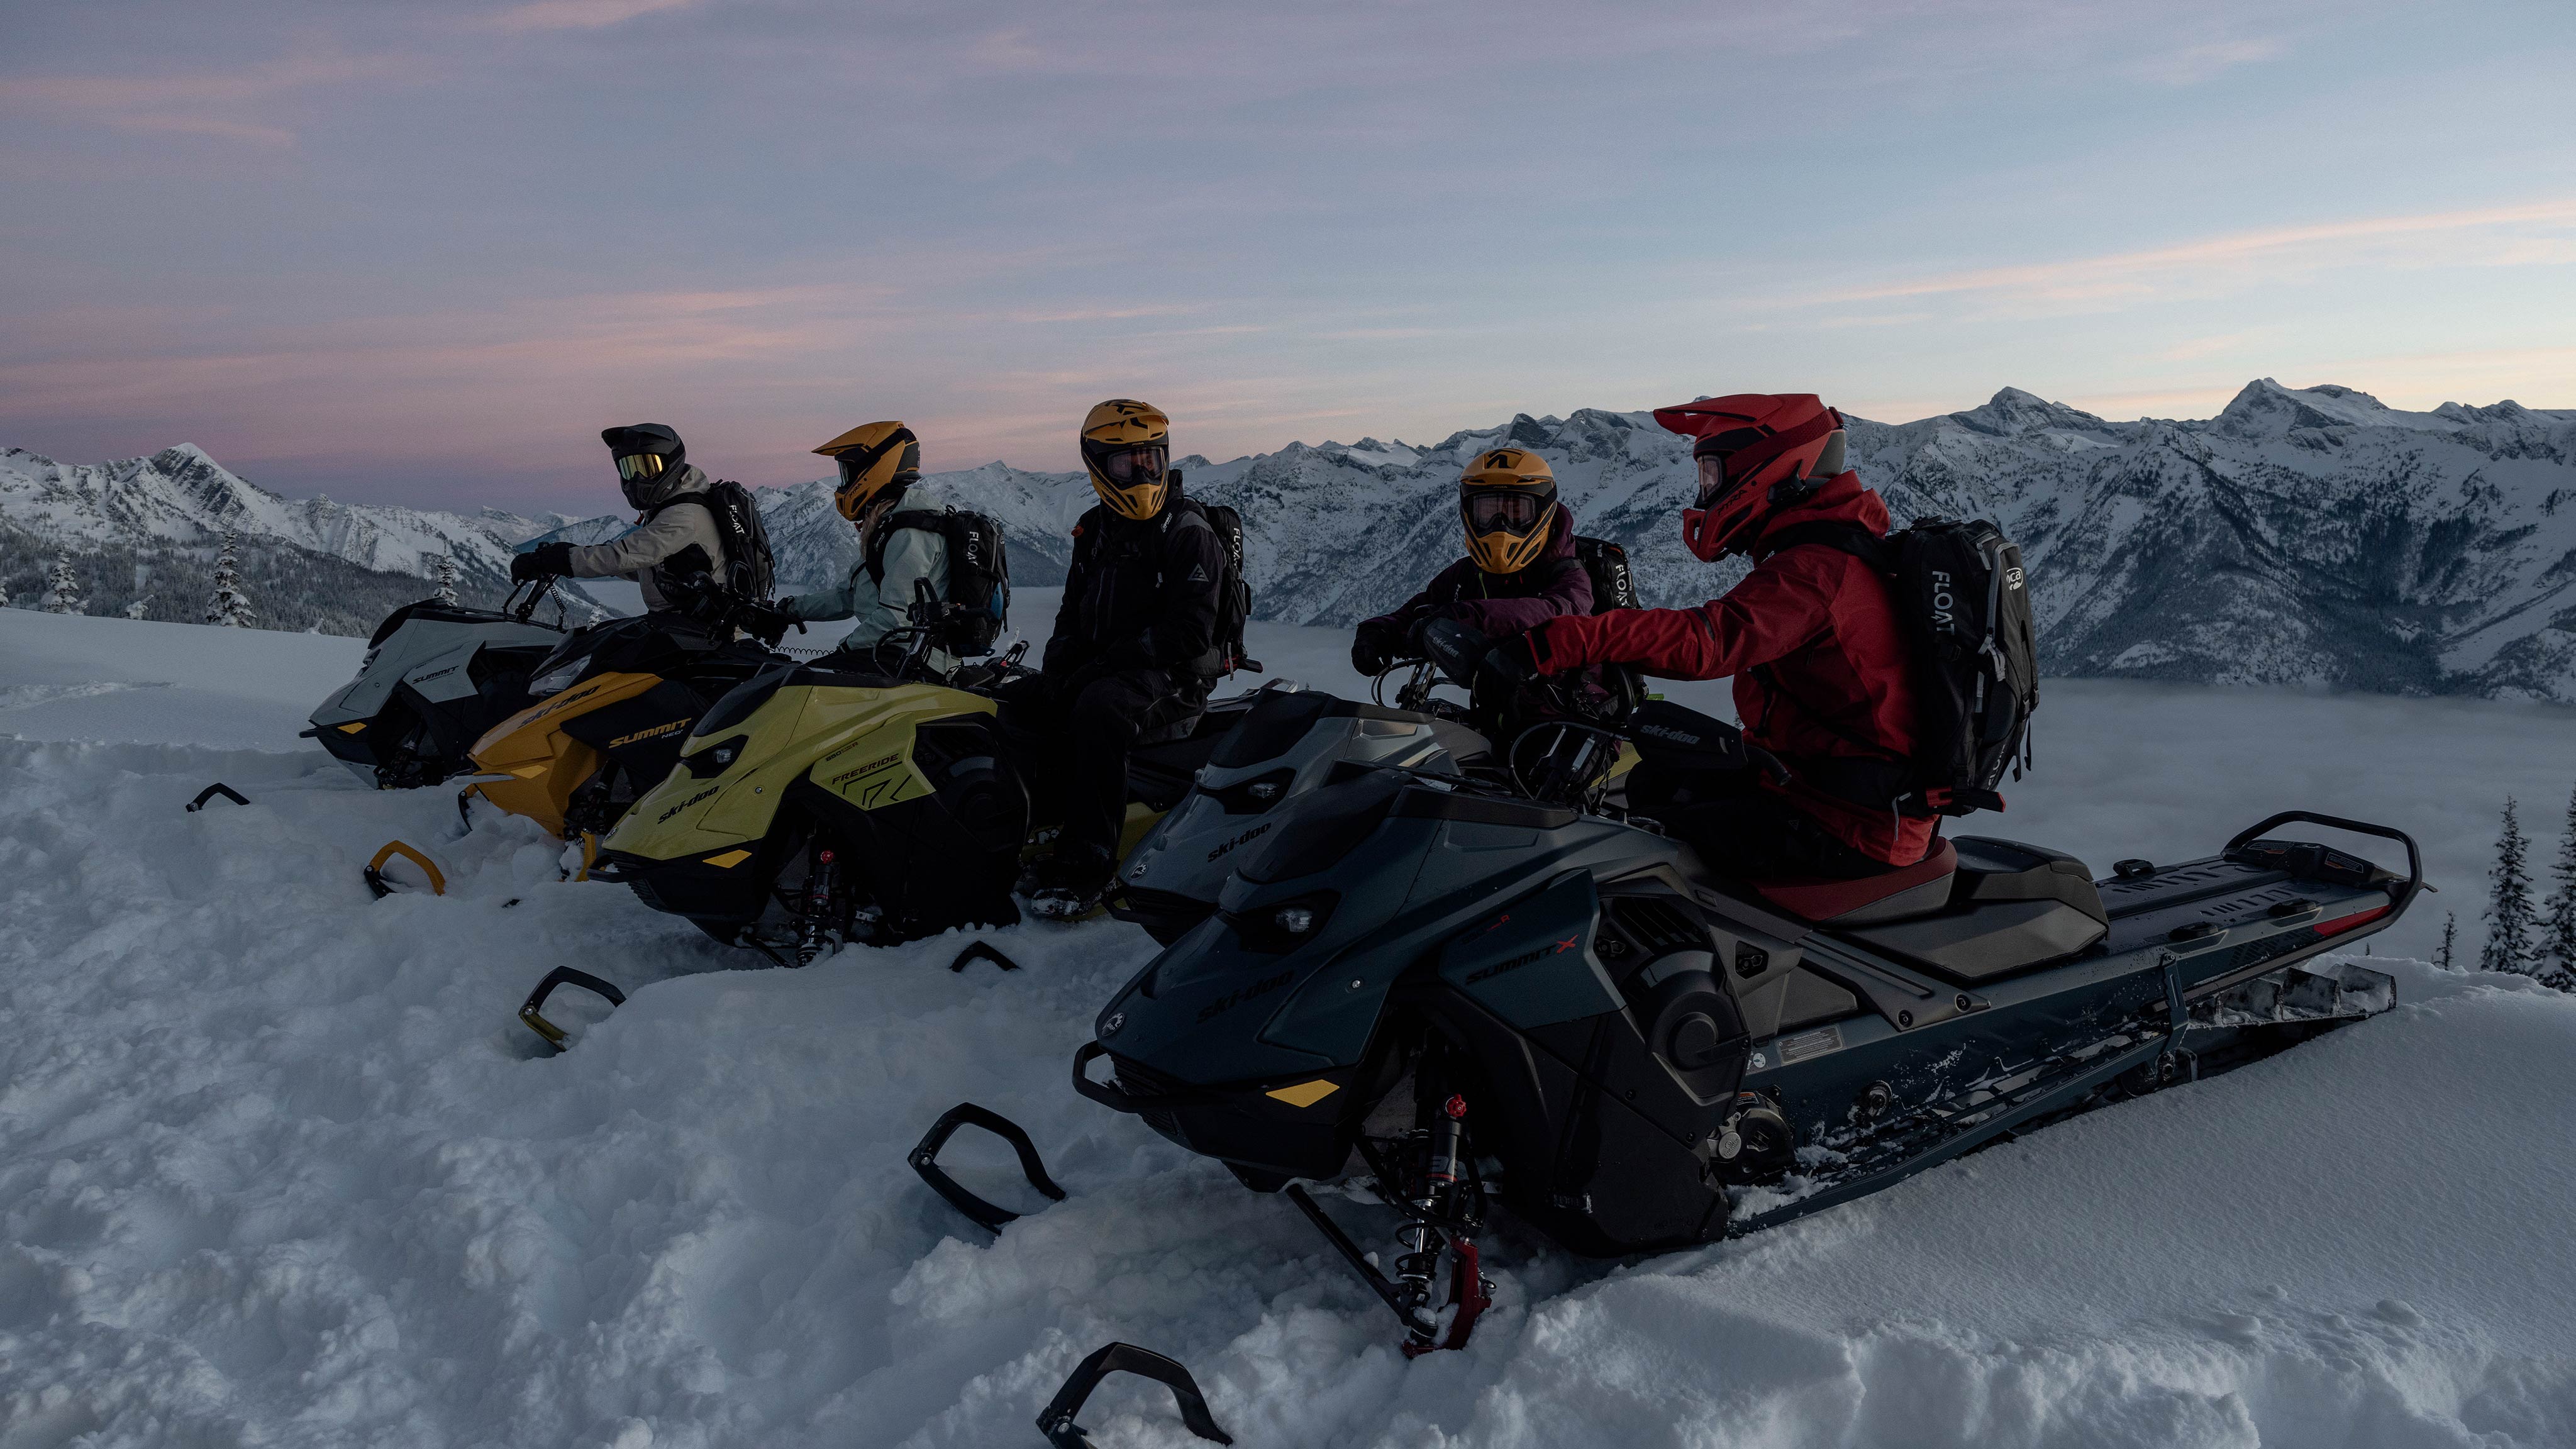 Five snowmobile riders on top of a snowy mountain